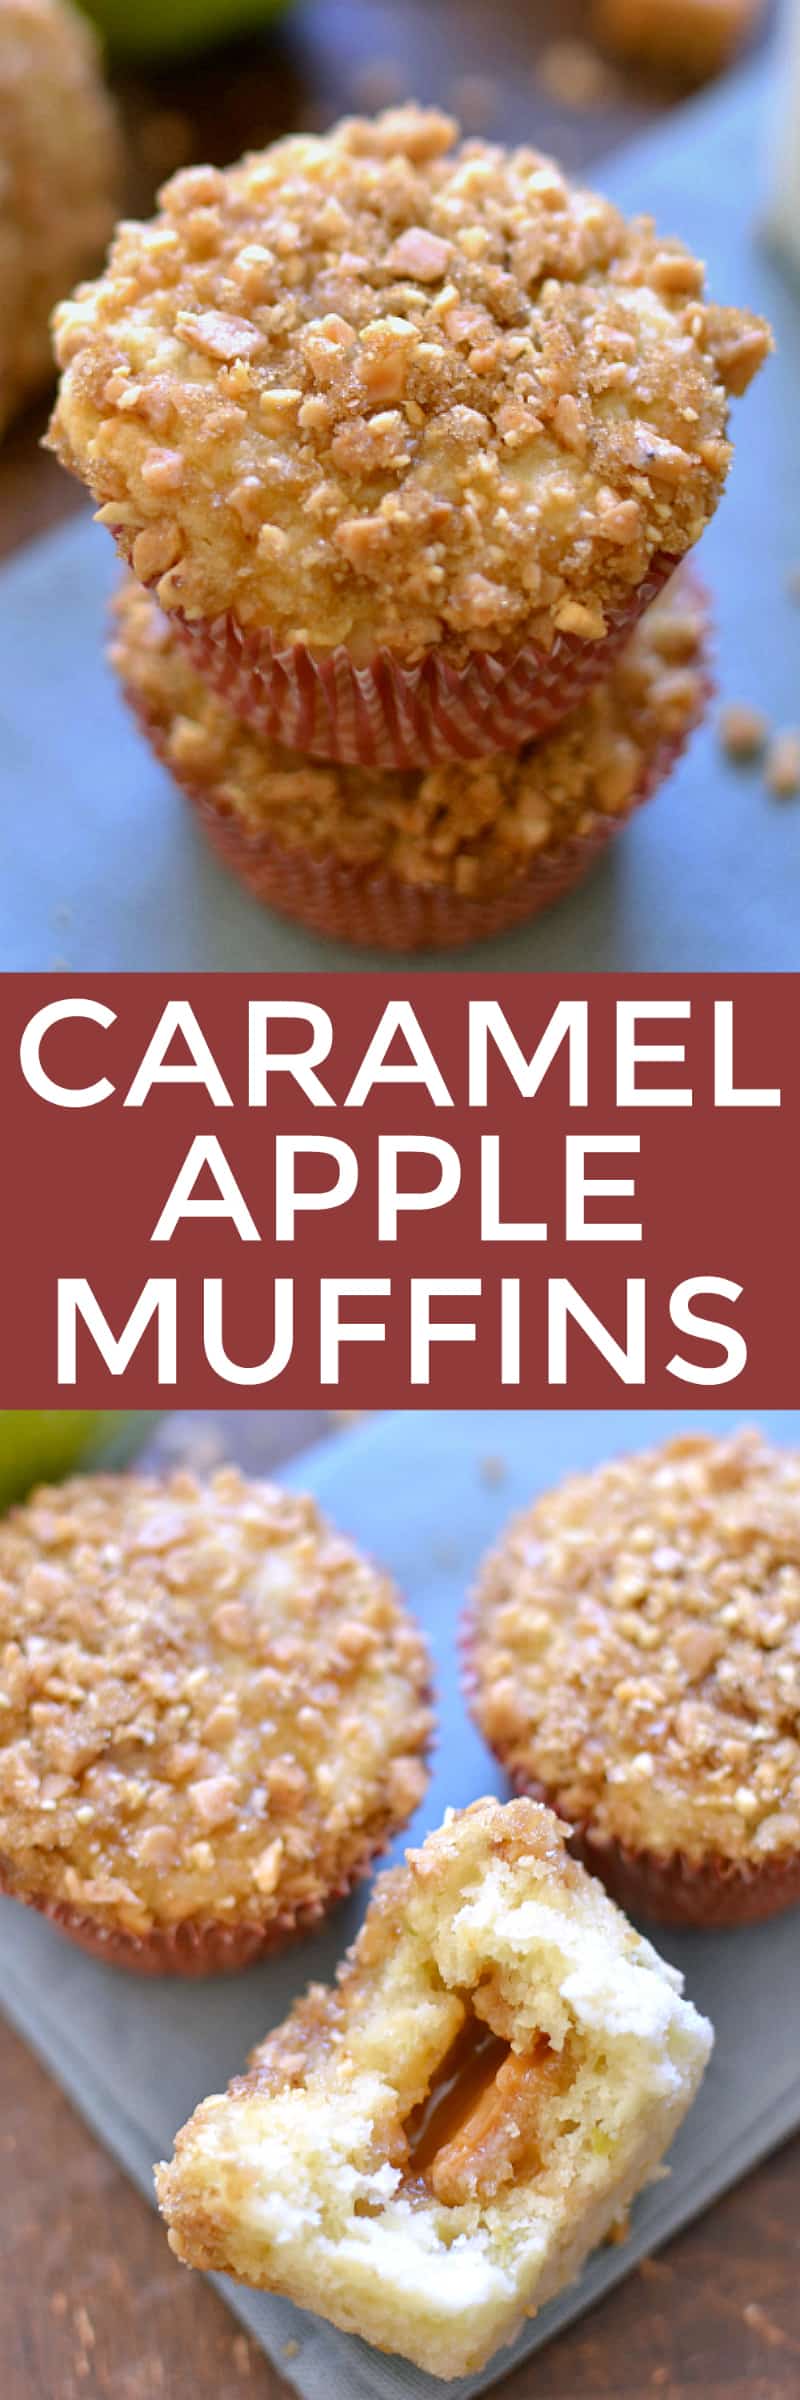 Collage image of Caramel Apple Muffins